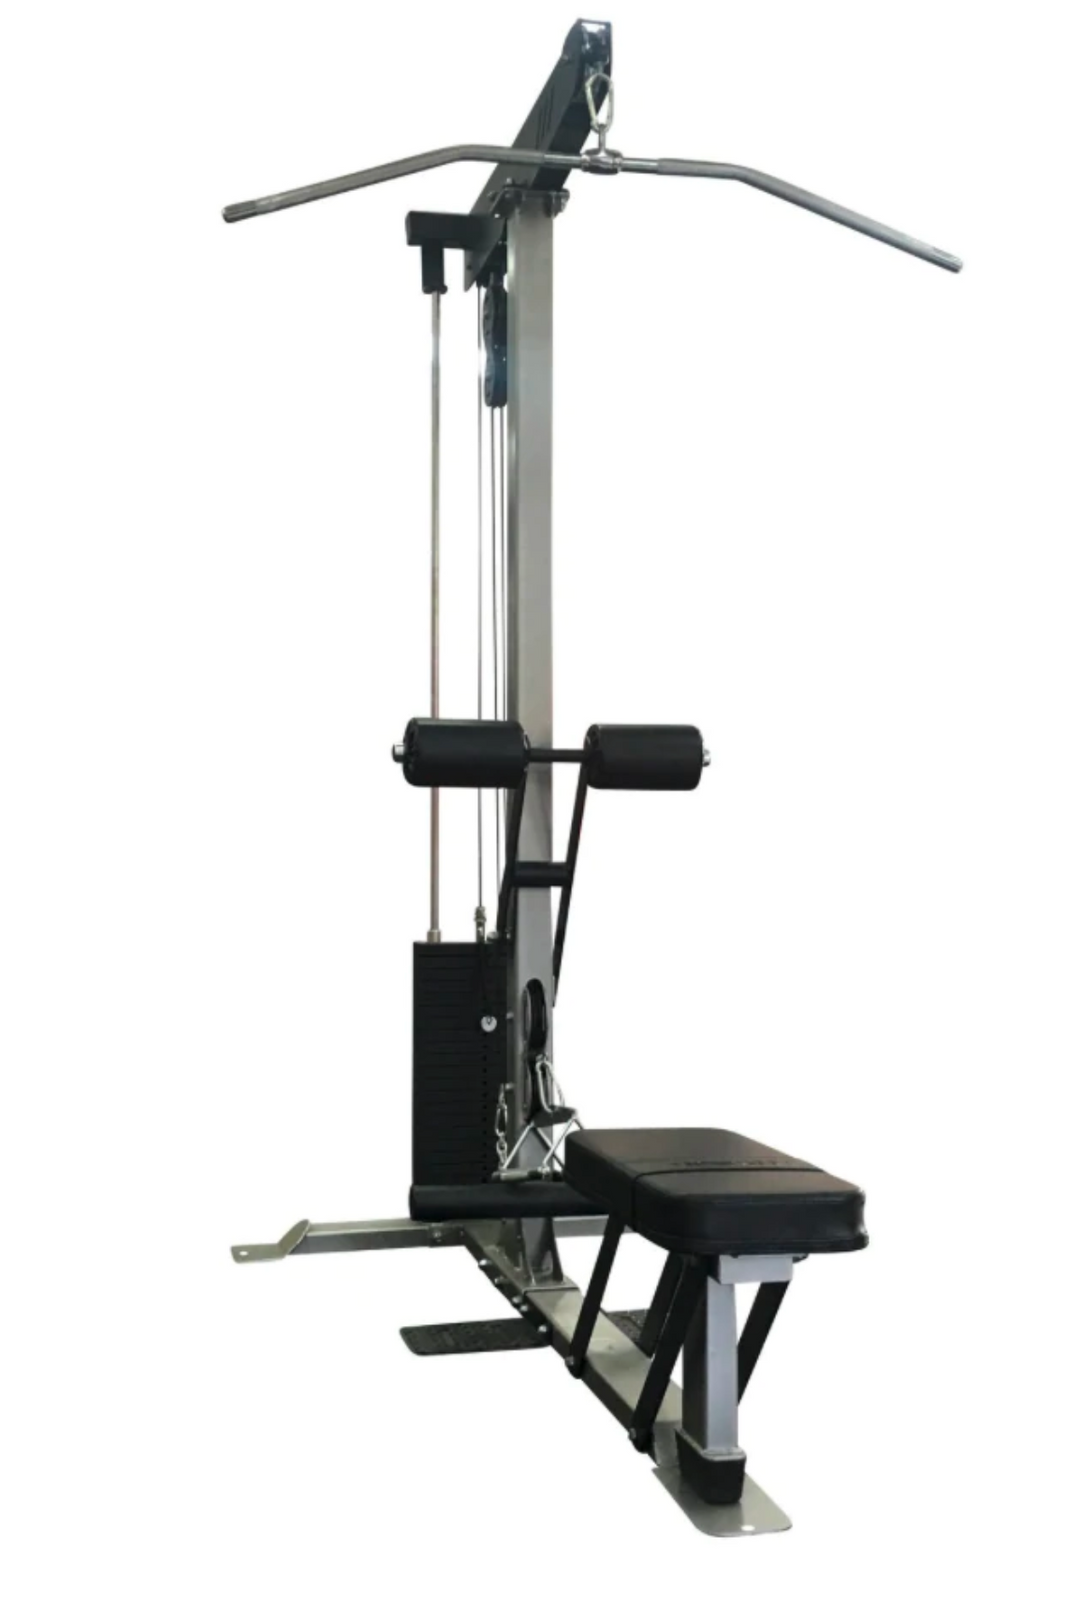 Body Iron Commercial 110kg Lat Pull Down / Low Row Machine